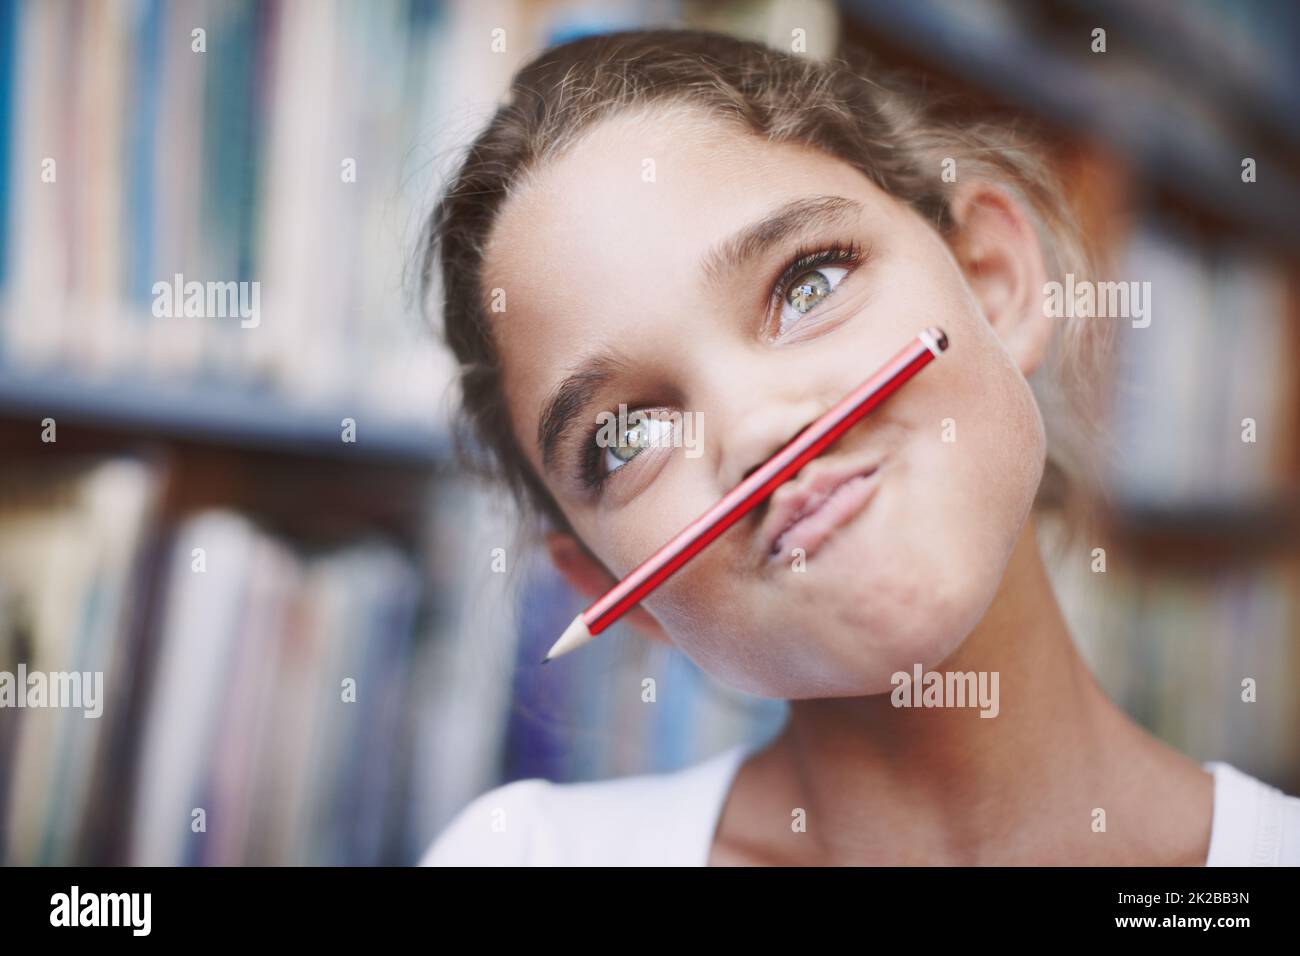 Class clown. A cute young girl balancing her pencil on her lips and pulling a face. Stock Photo